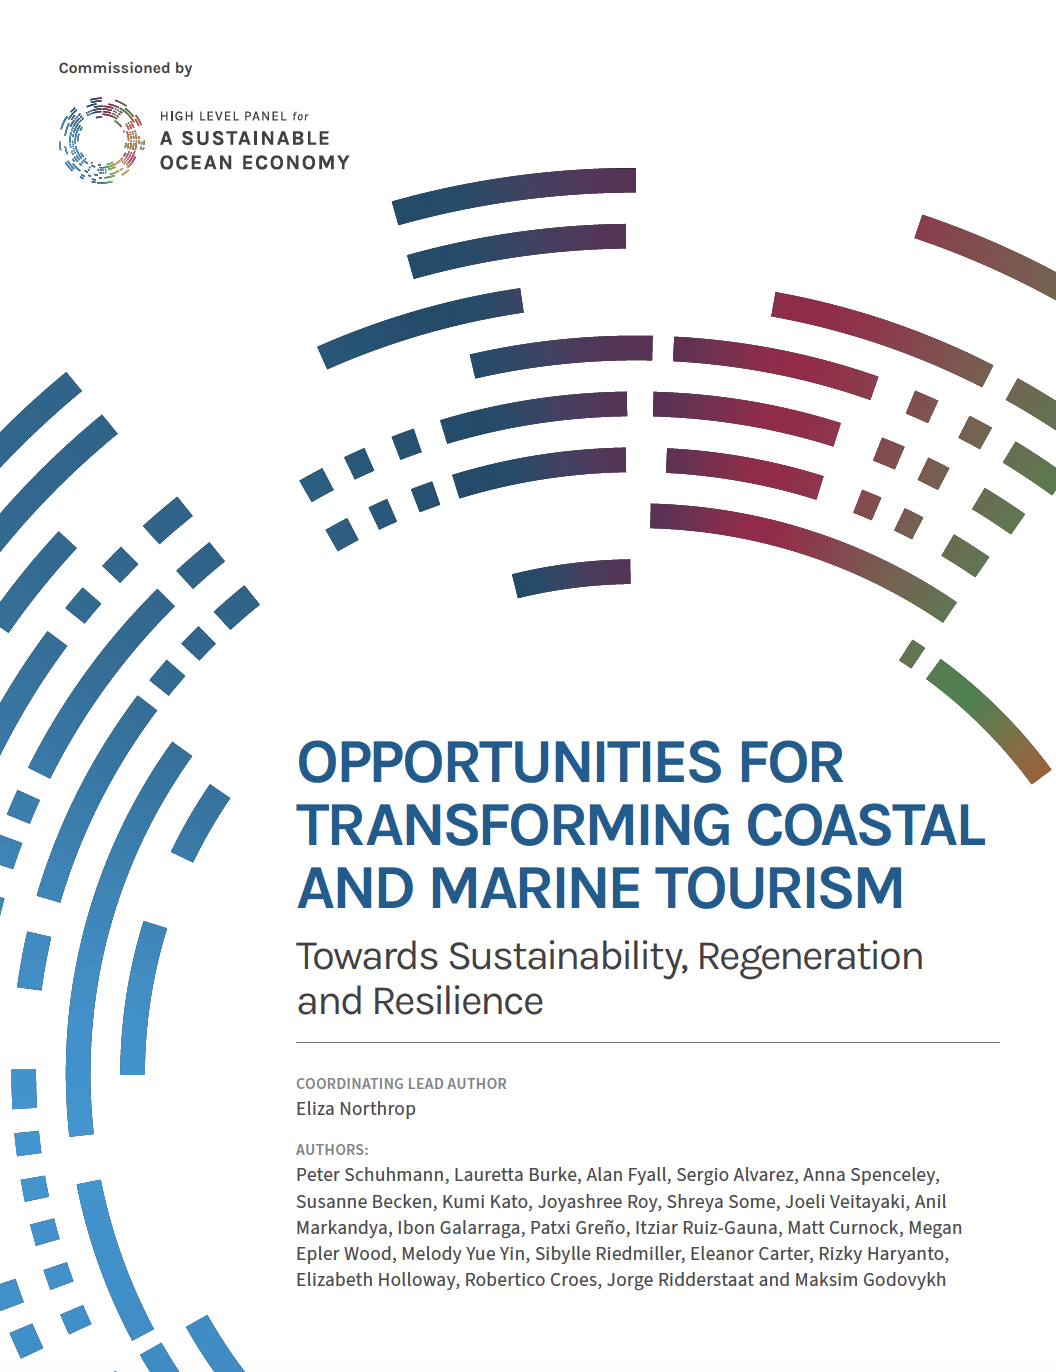 Opportunities for Transforming Coastal and Marine Tourism: Towards Sustainability, Regeneration and Resilience